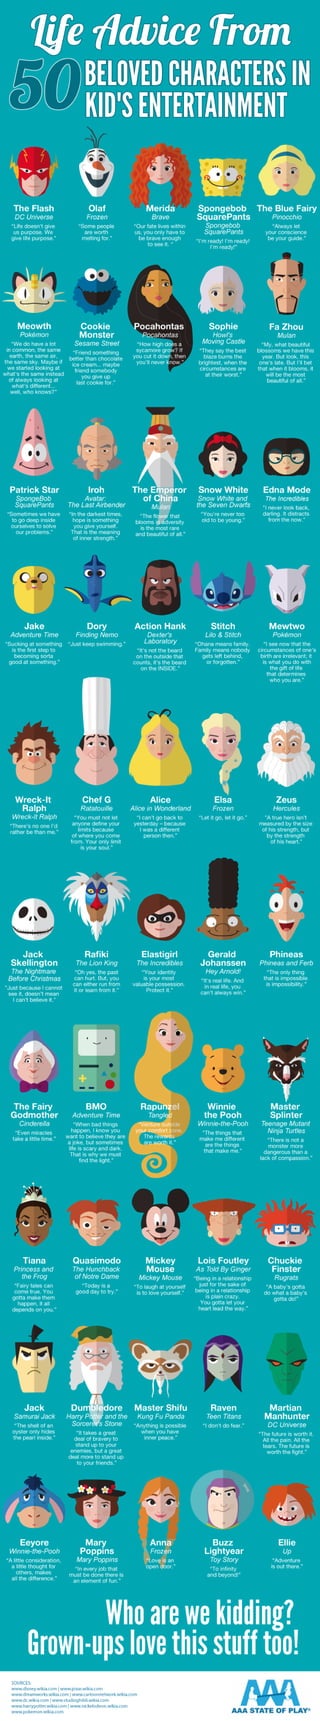 Life Advice from 50 Beloved Characters in Kid's Entertainment 